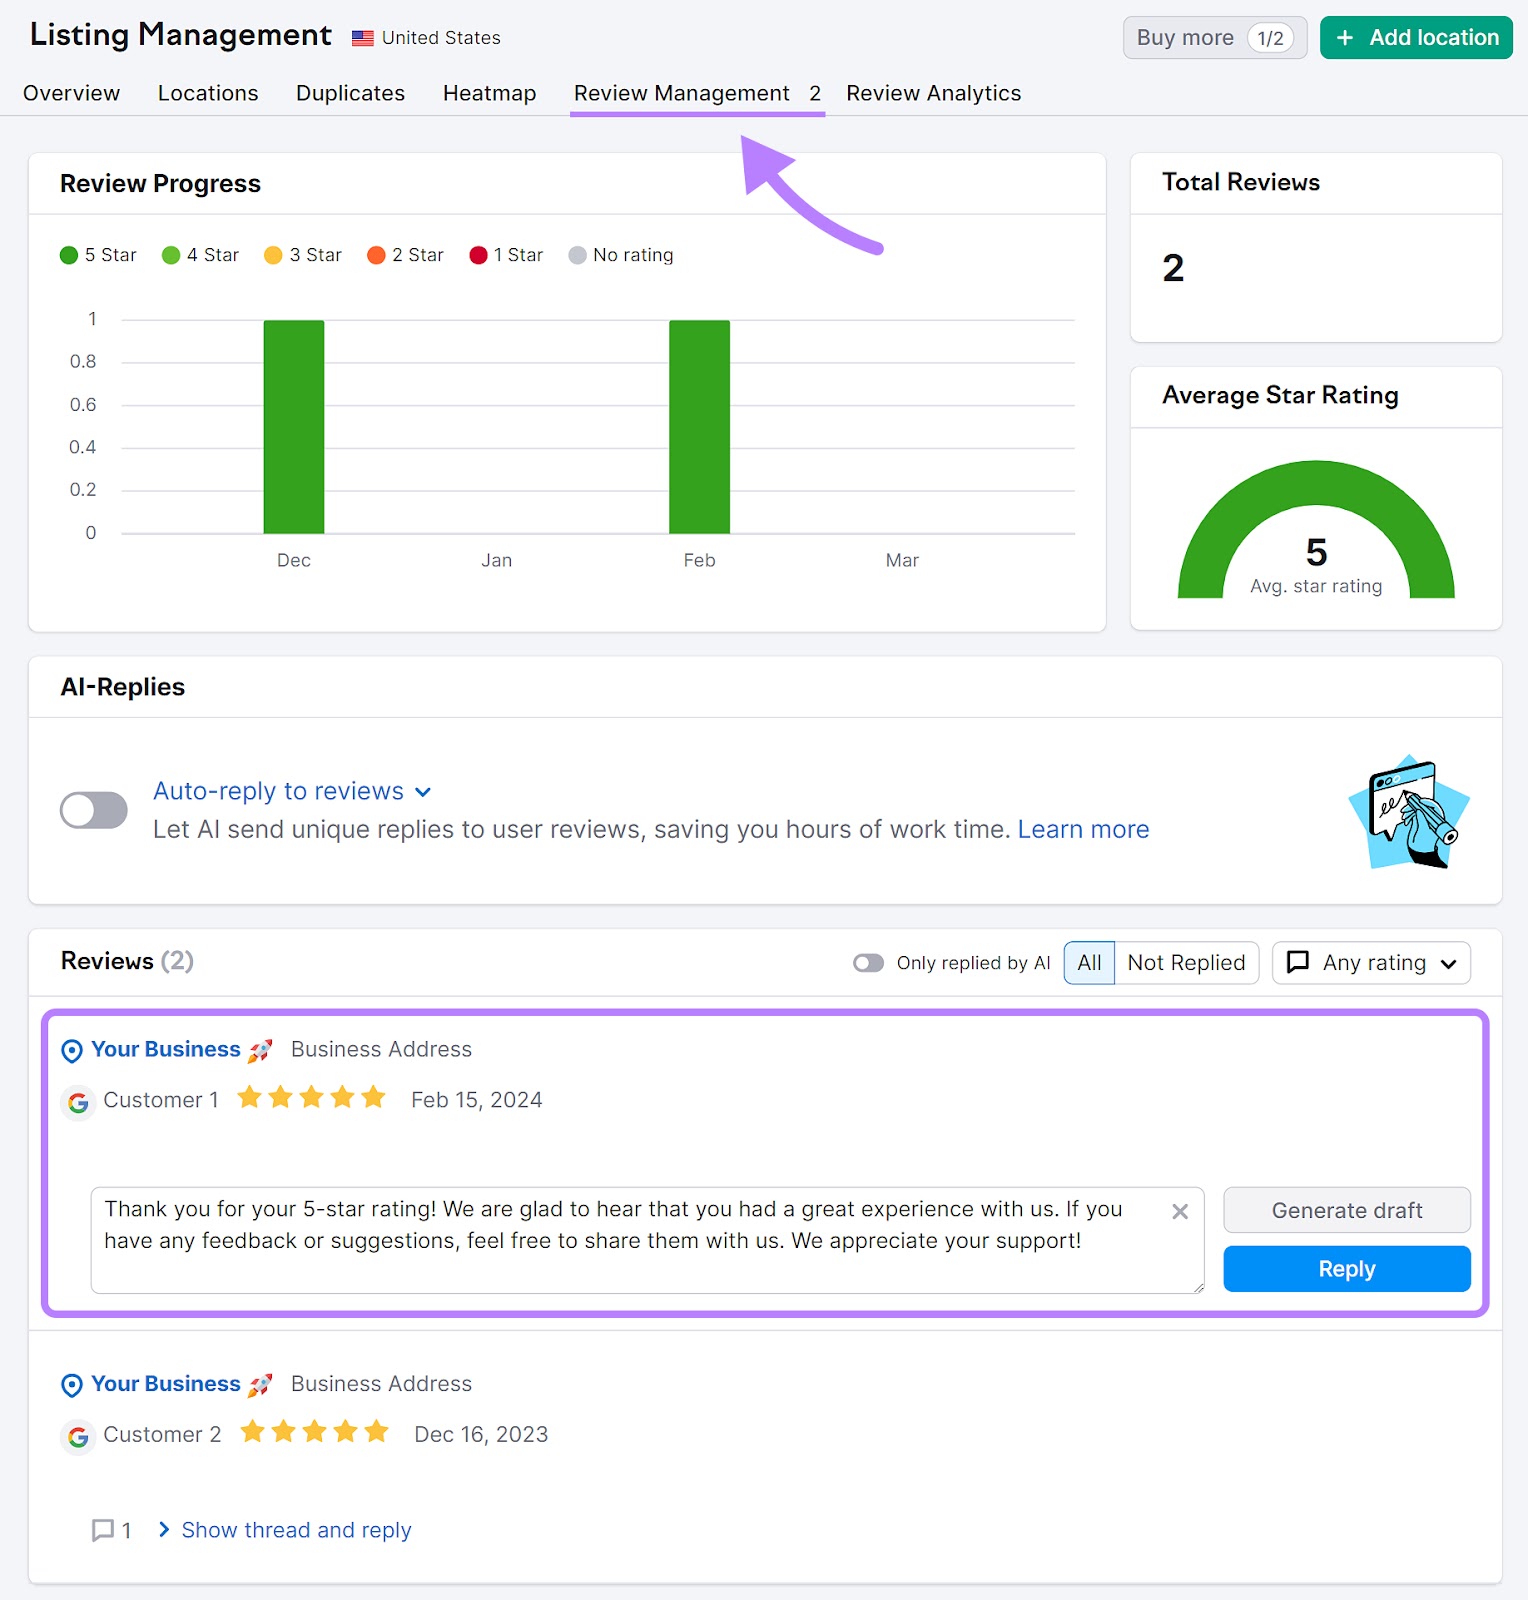 Review Management tab of Listing Management showing the ability to respond to reviews.